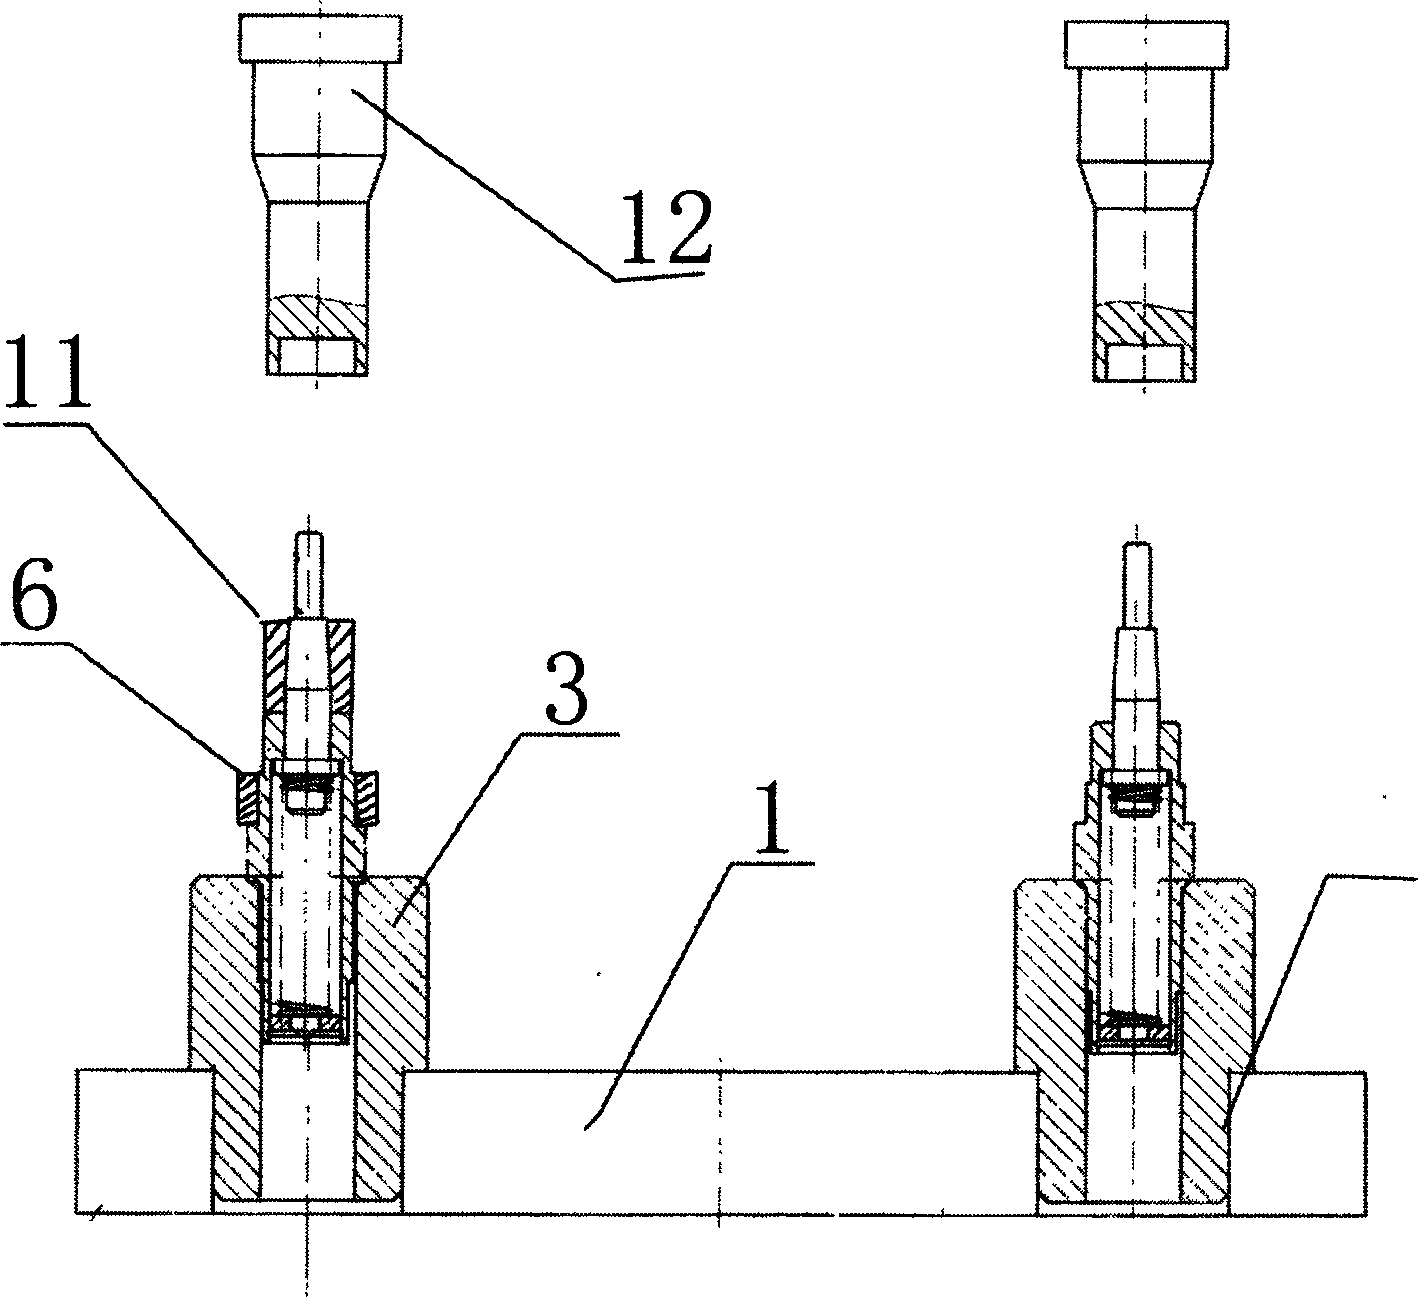 Press-fitting fixture for guide pipe and seat ring of air cylinder head